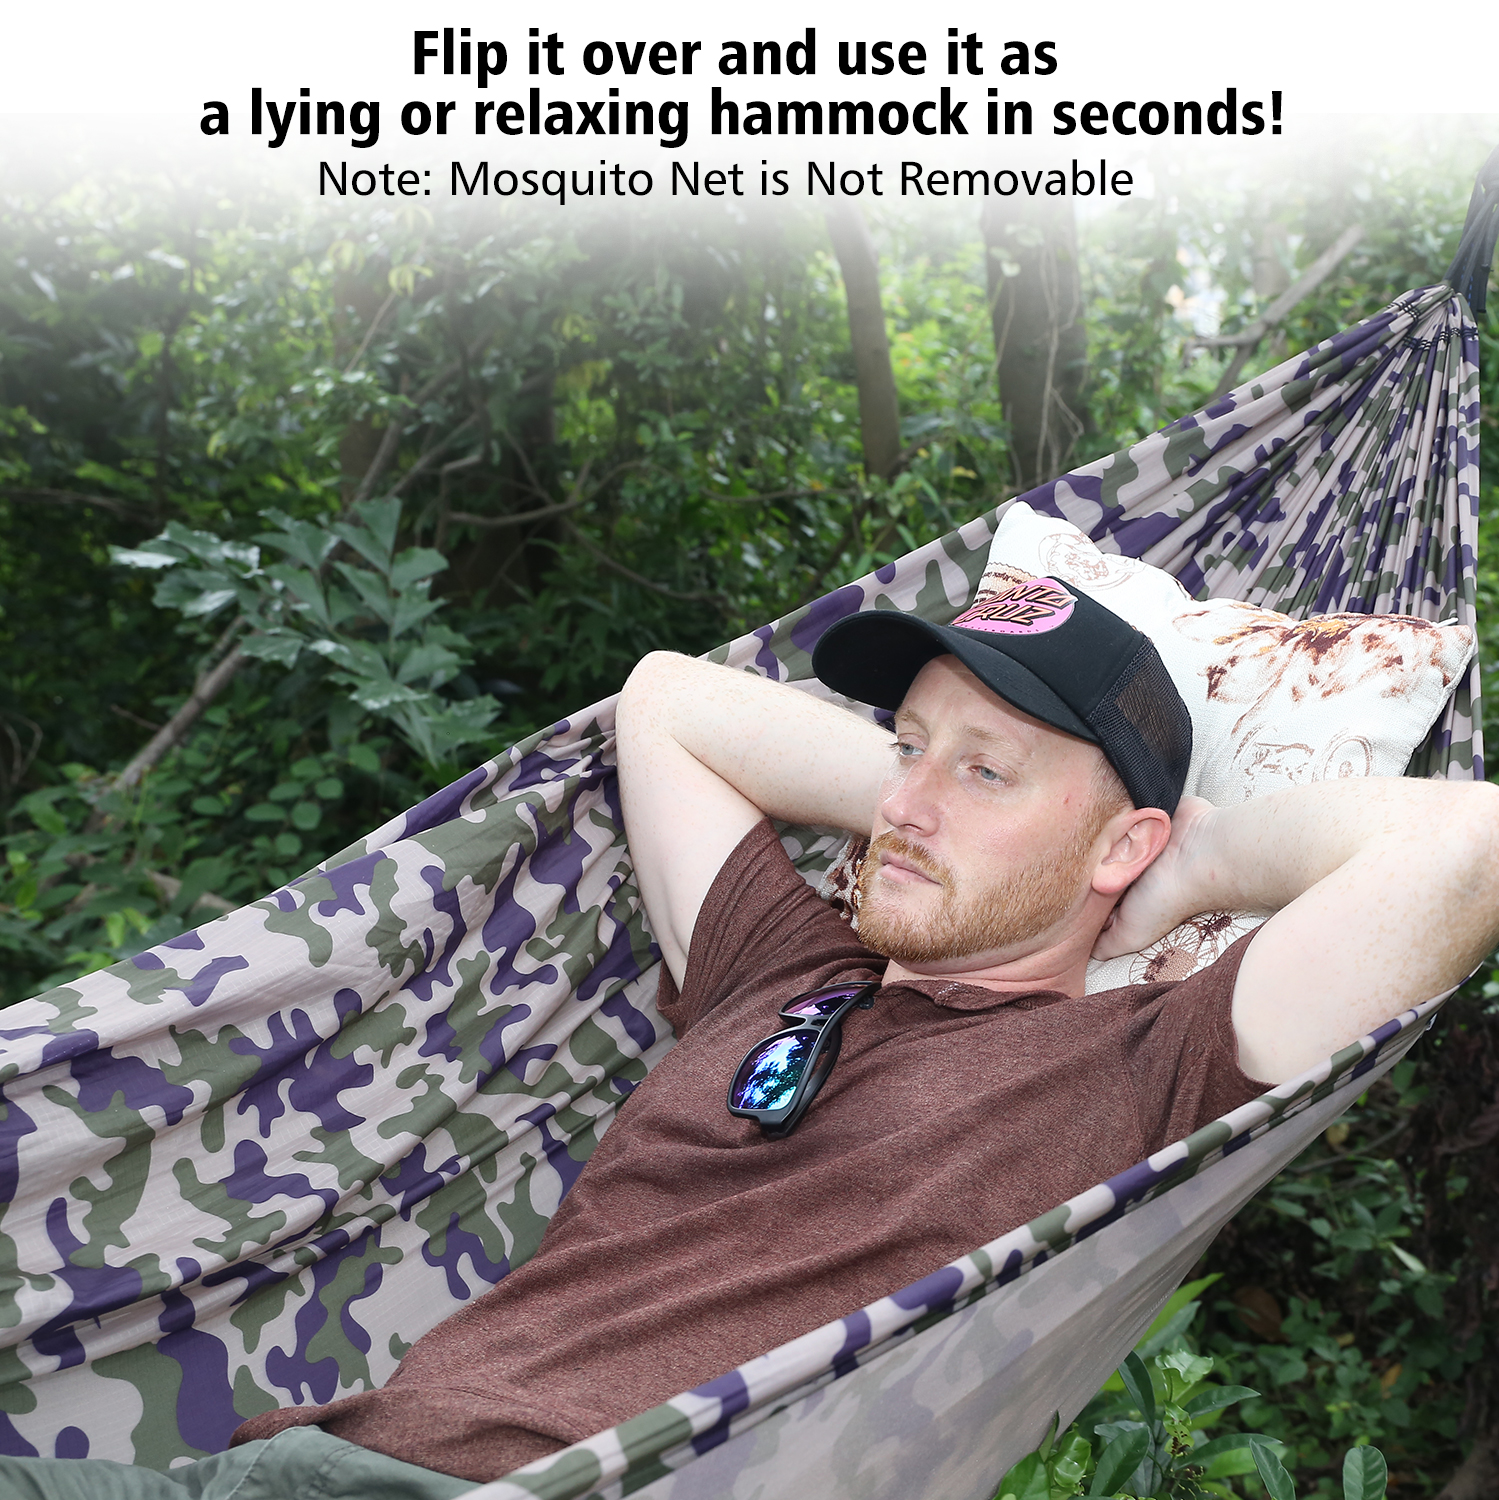 US$ 69.99 - Sunyear Camping Hammock with Rain Fly and Net